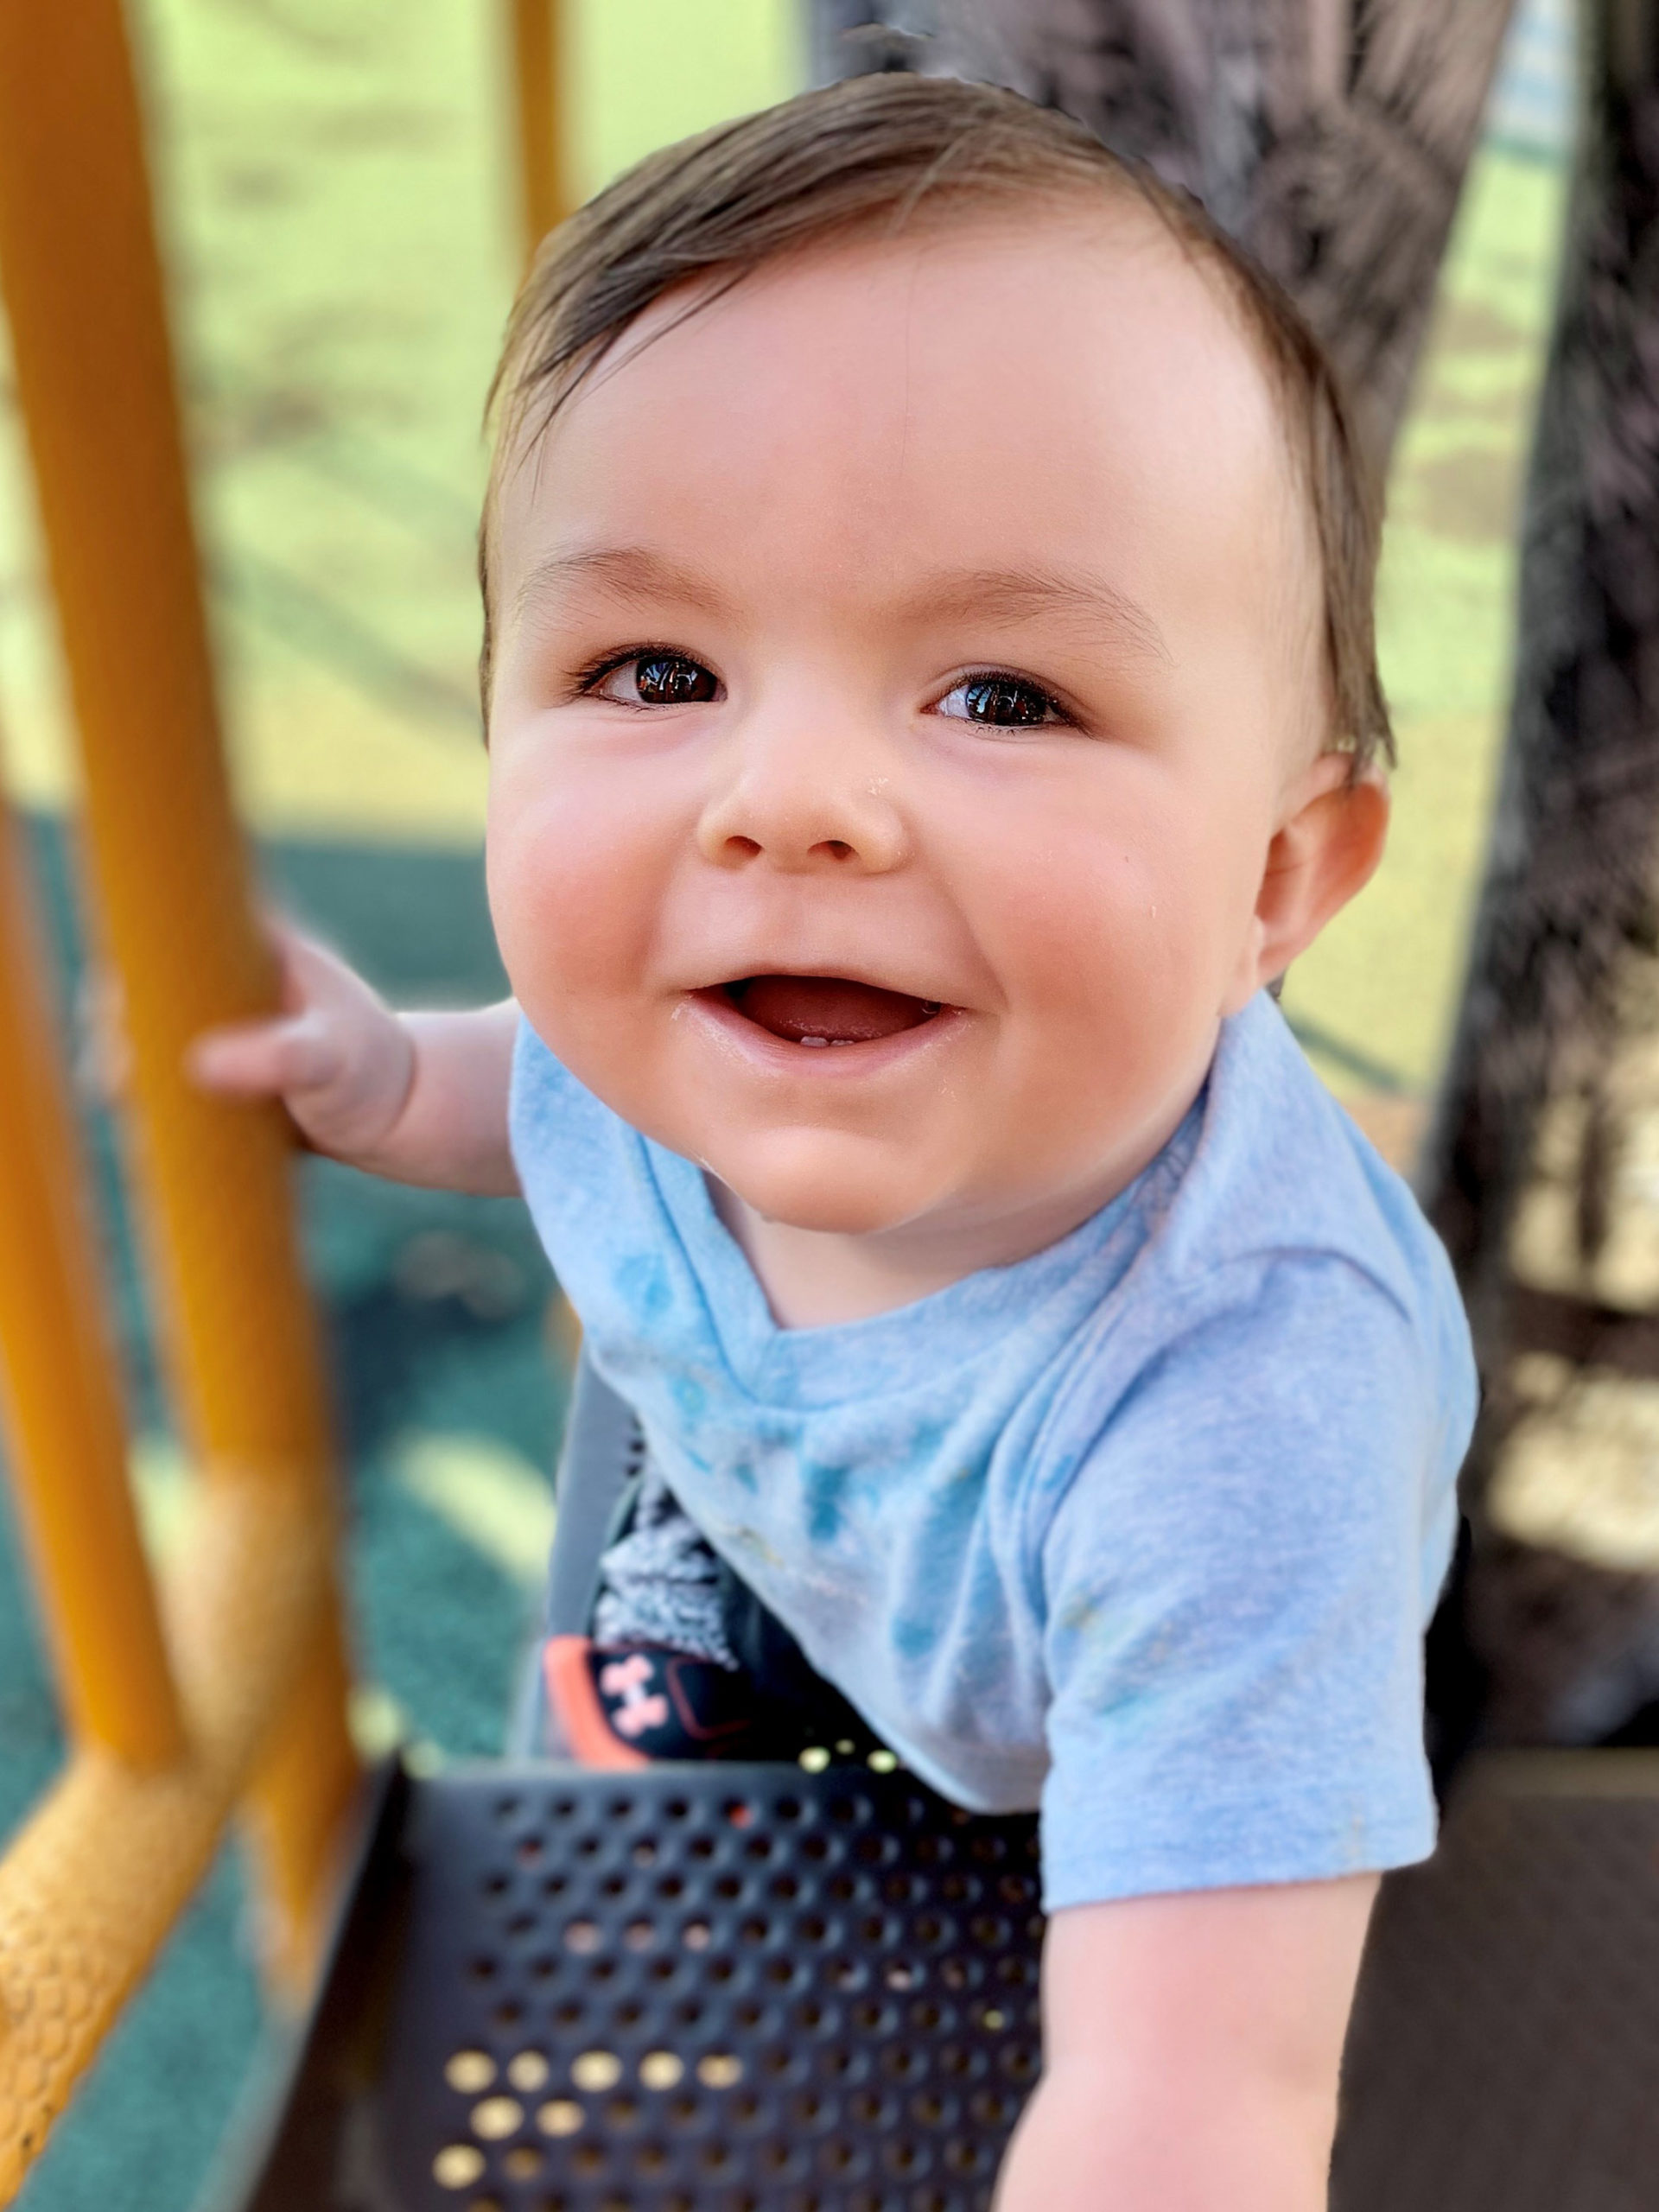 Tavik smiling at the camera while playing on a playground